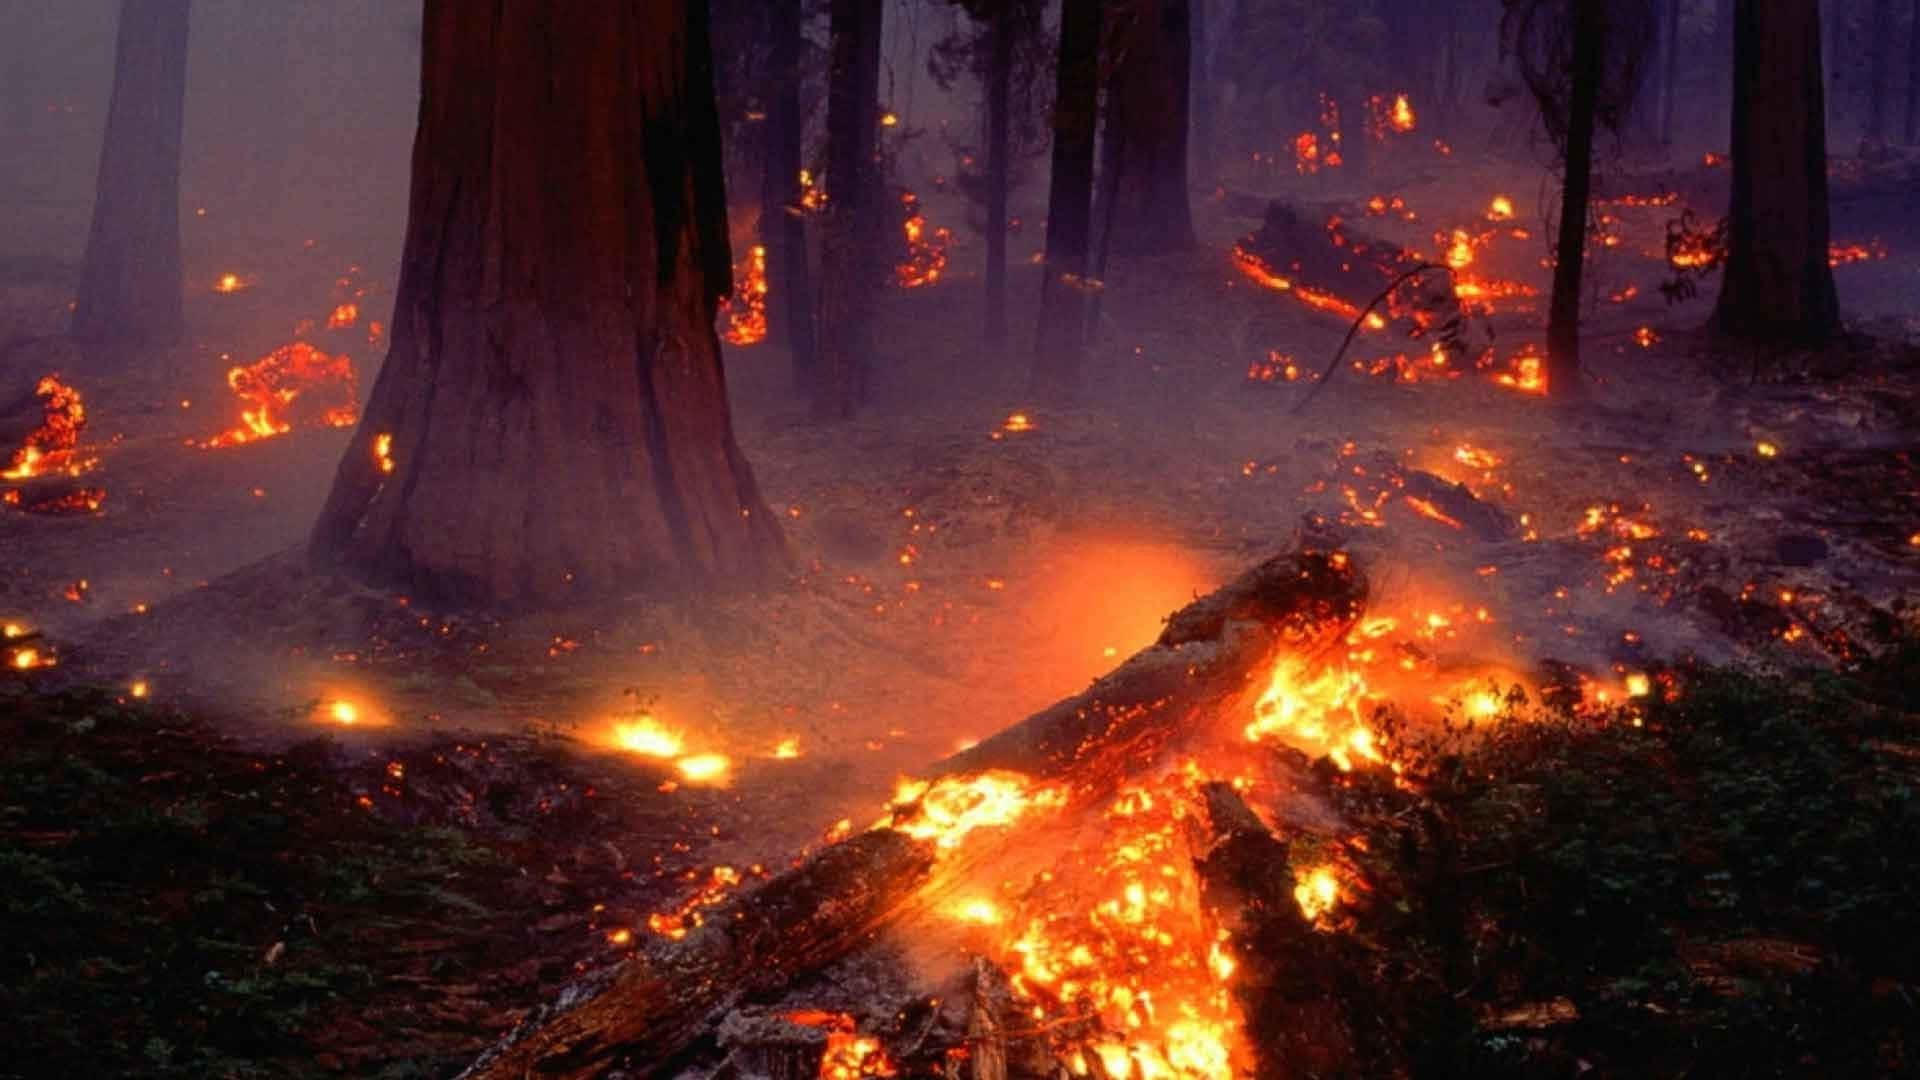 A Forest Fire Is Burning In The Middle Of A Forest